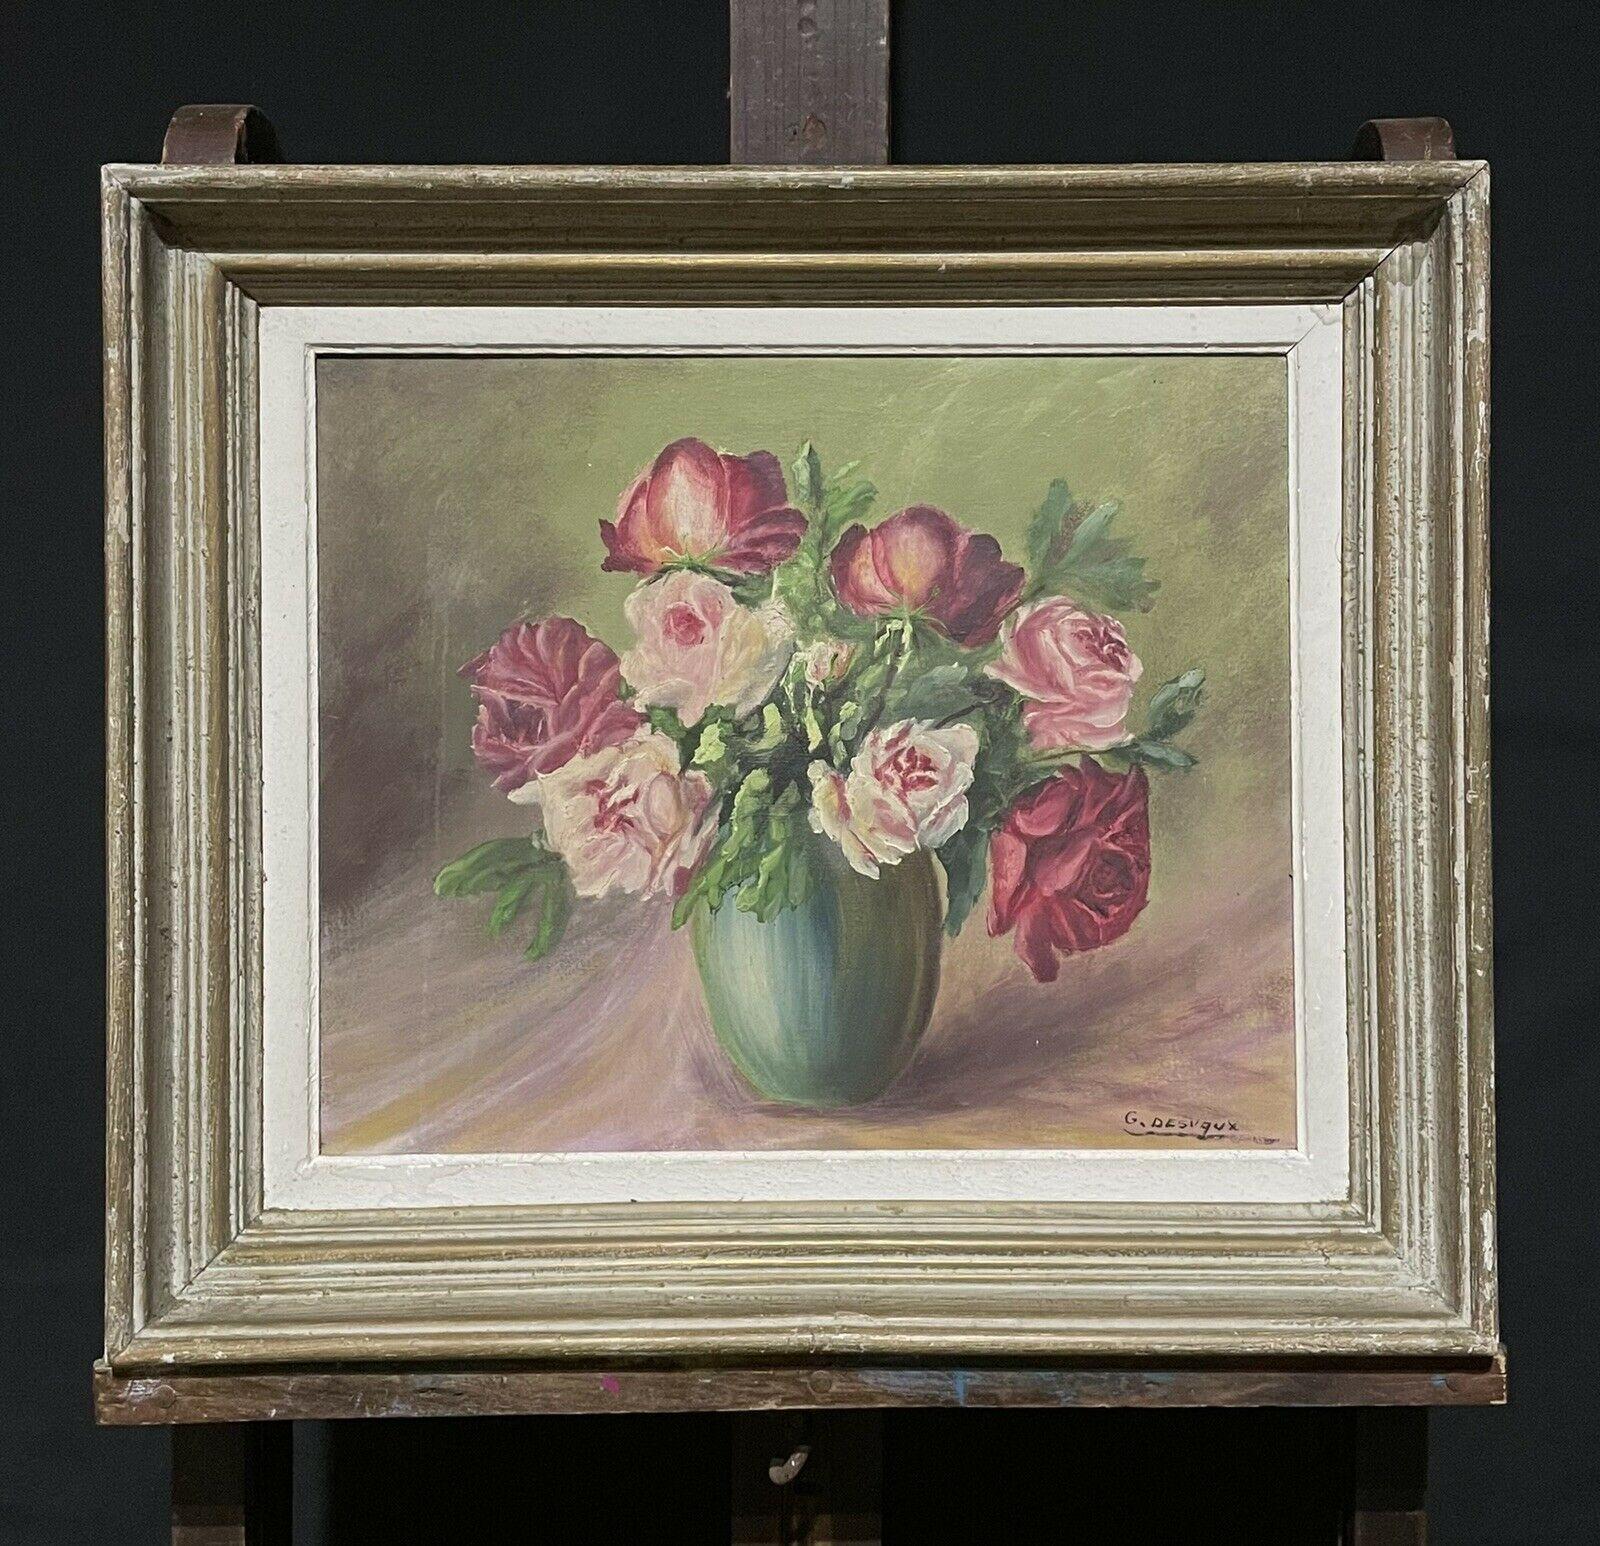 Unknown Still-Life Painting - 1950's Vintage French Impressionist Signed Oil Pink Roses in Vase Framed